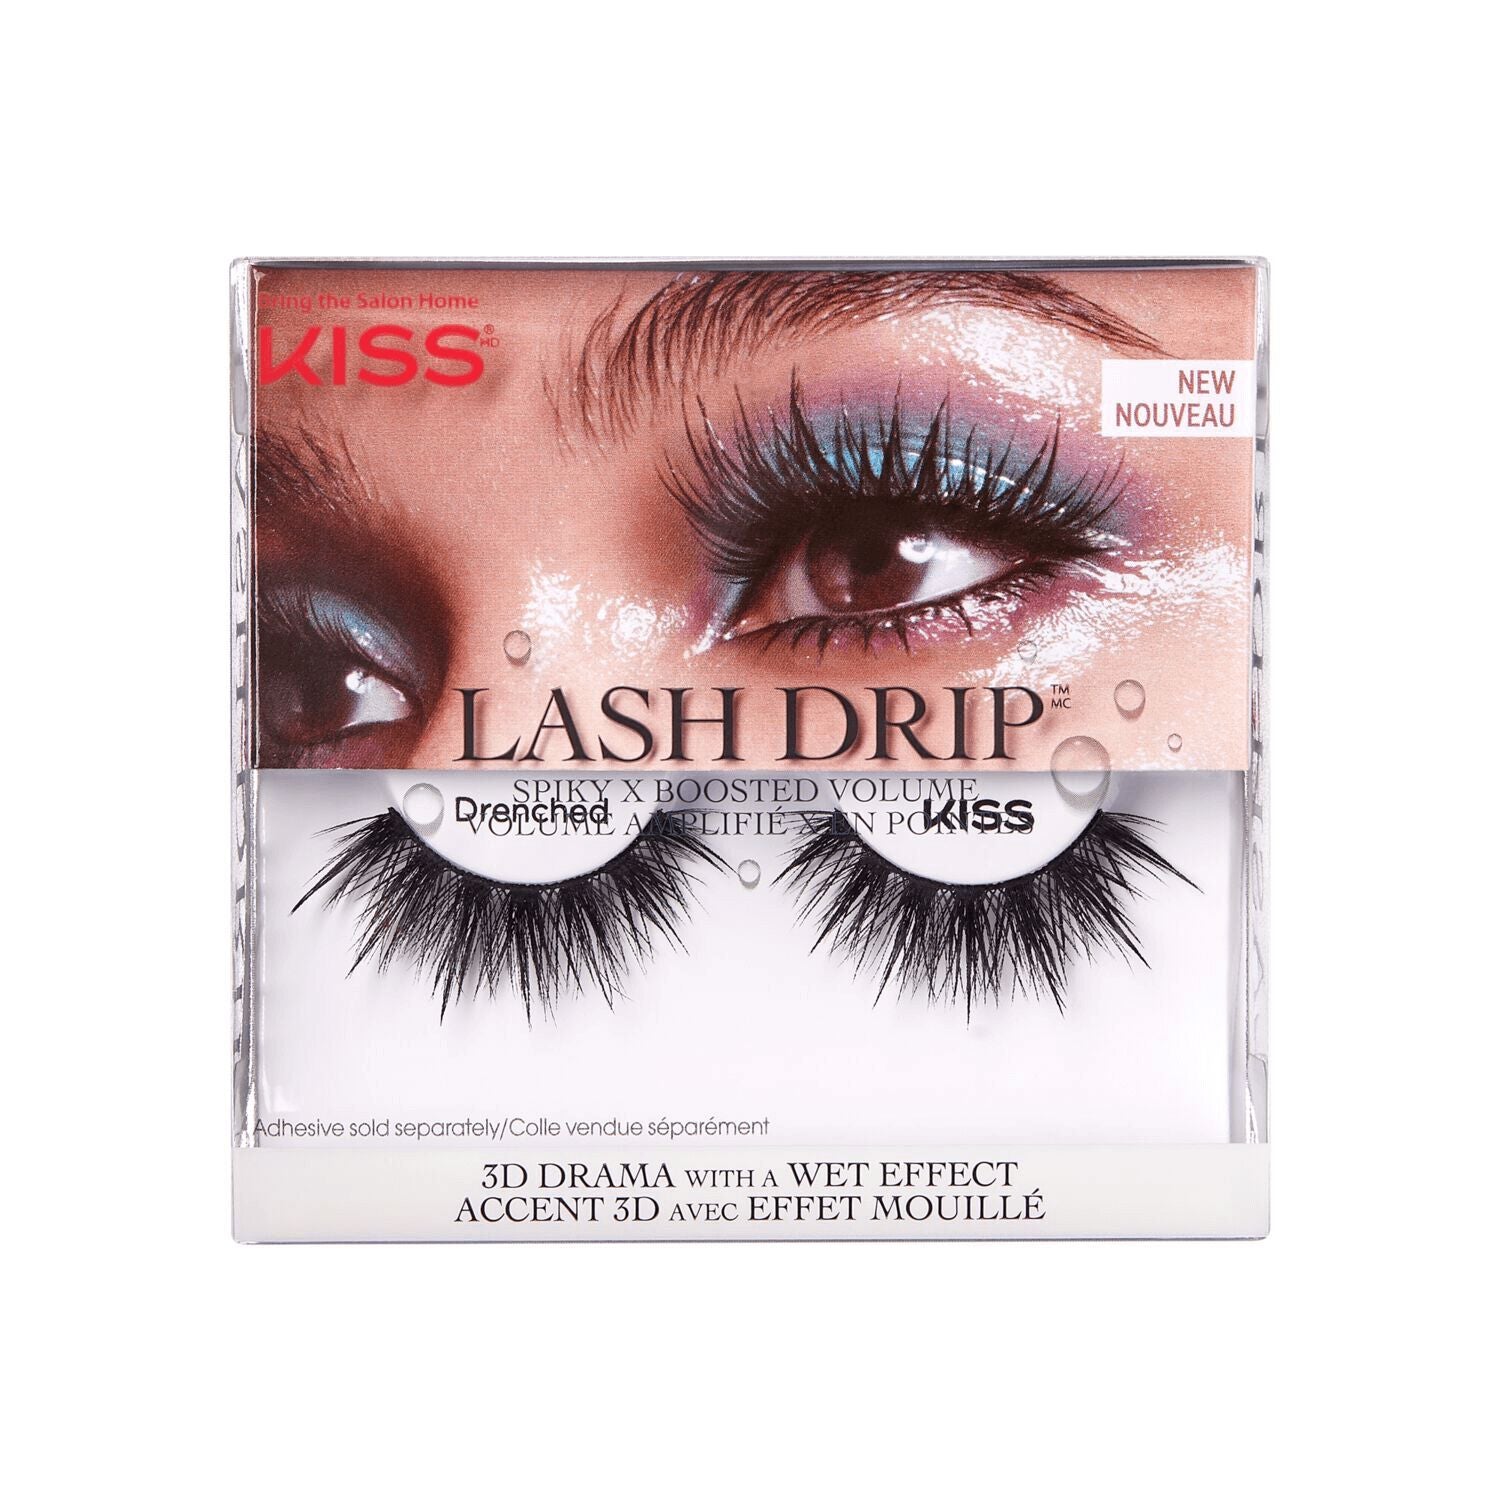 Lash Drip  by   KISS Lash Drip Spiky X Boosted False Eyelashes - Drenched